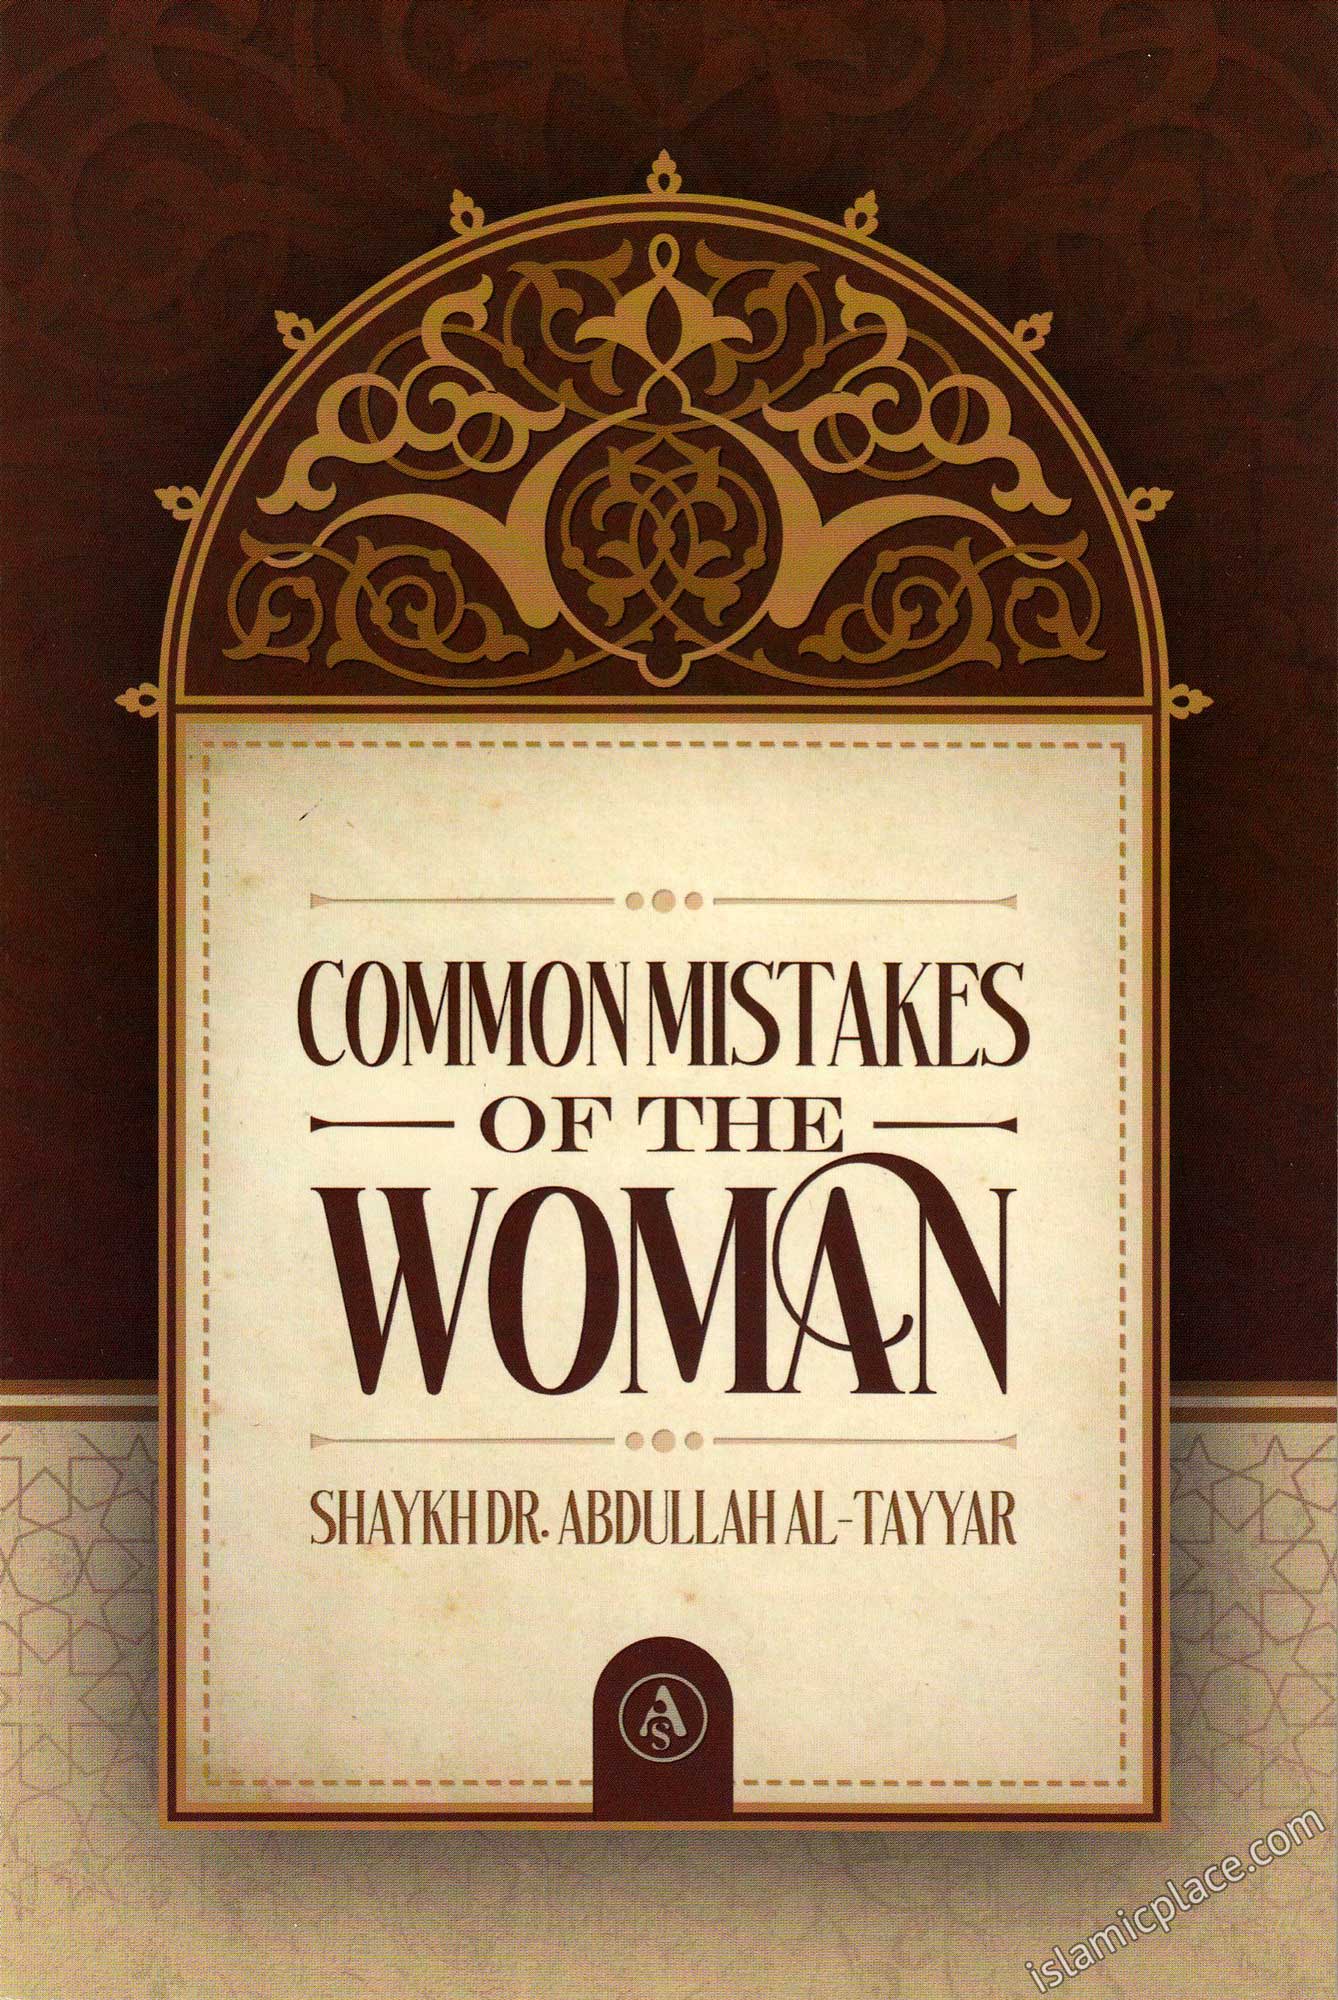 Common Mistakes of the Woman